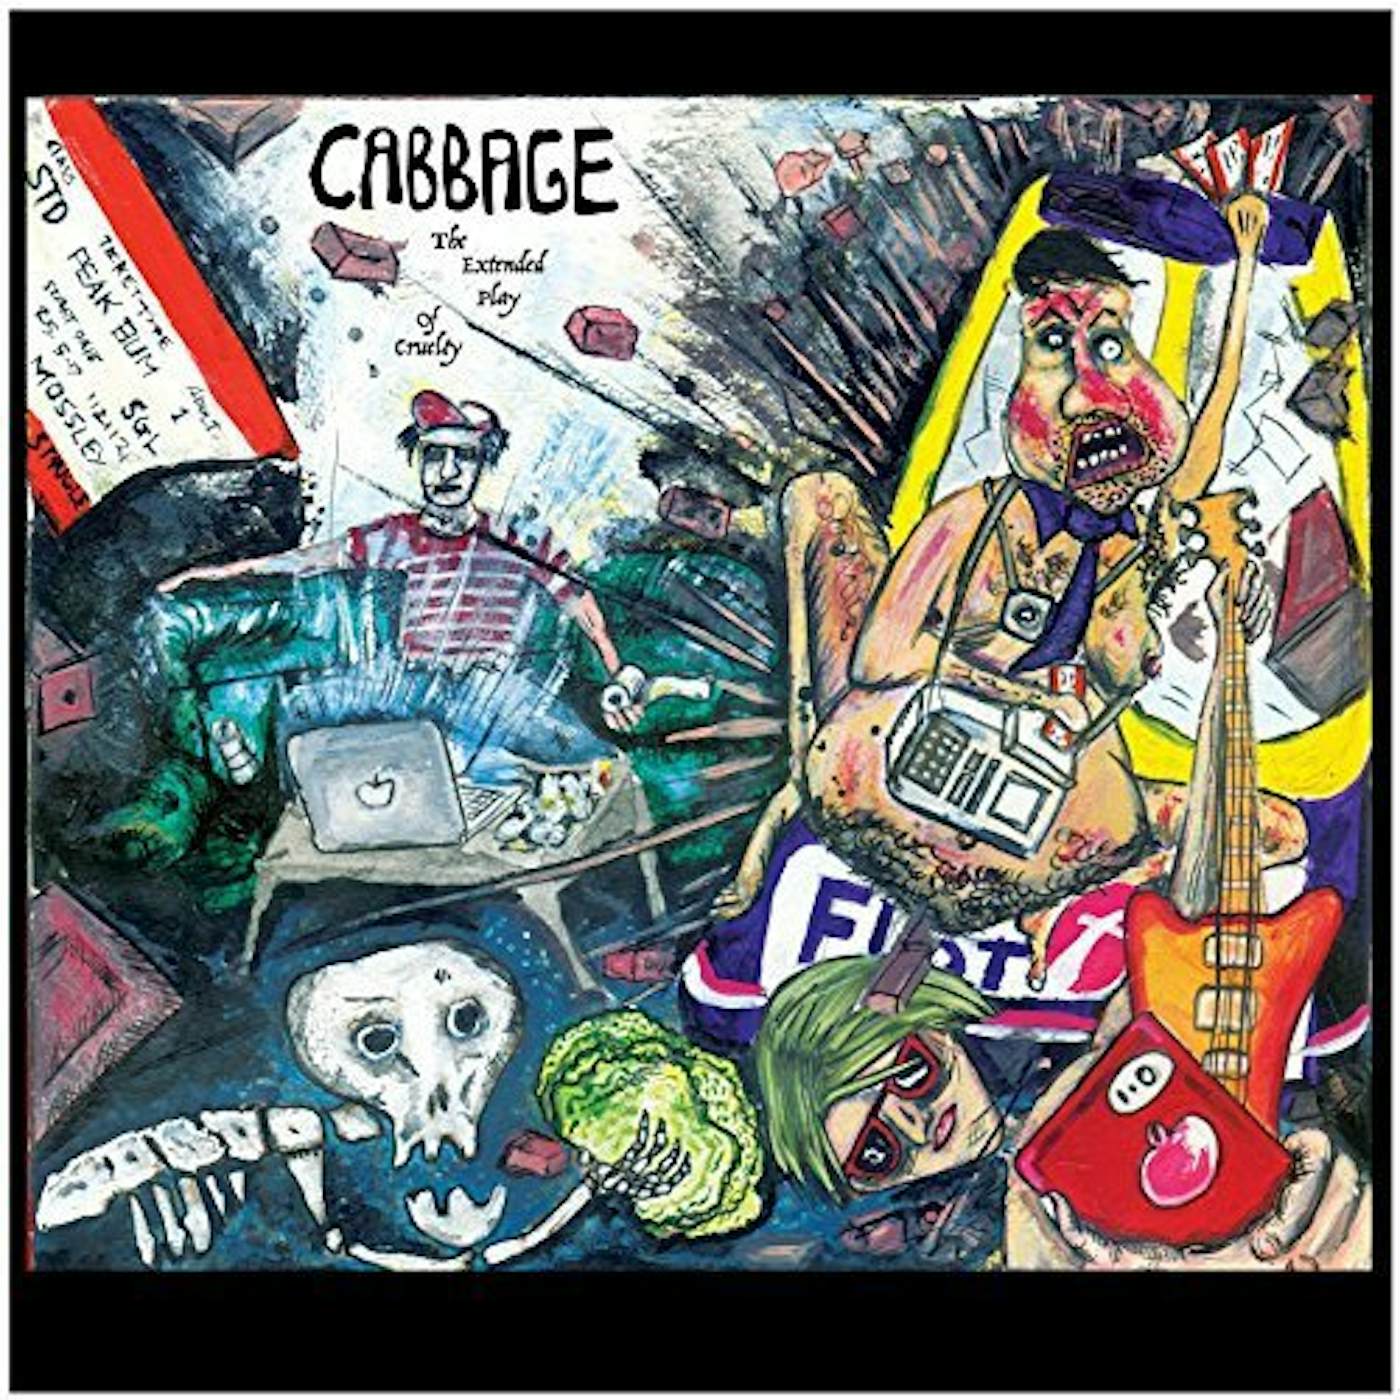 Cabbage EXTENDED PLAY OF CRUE Vinyl Record